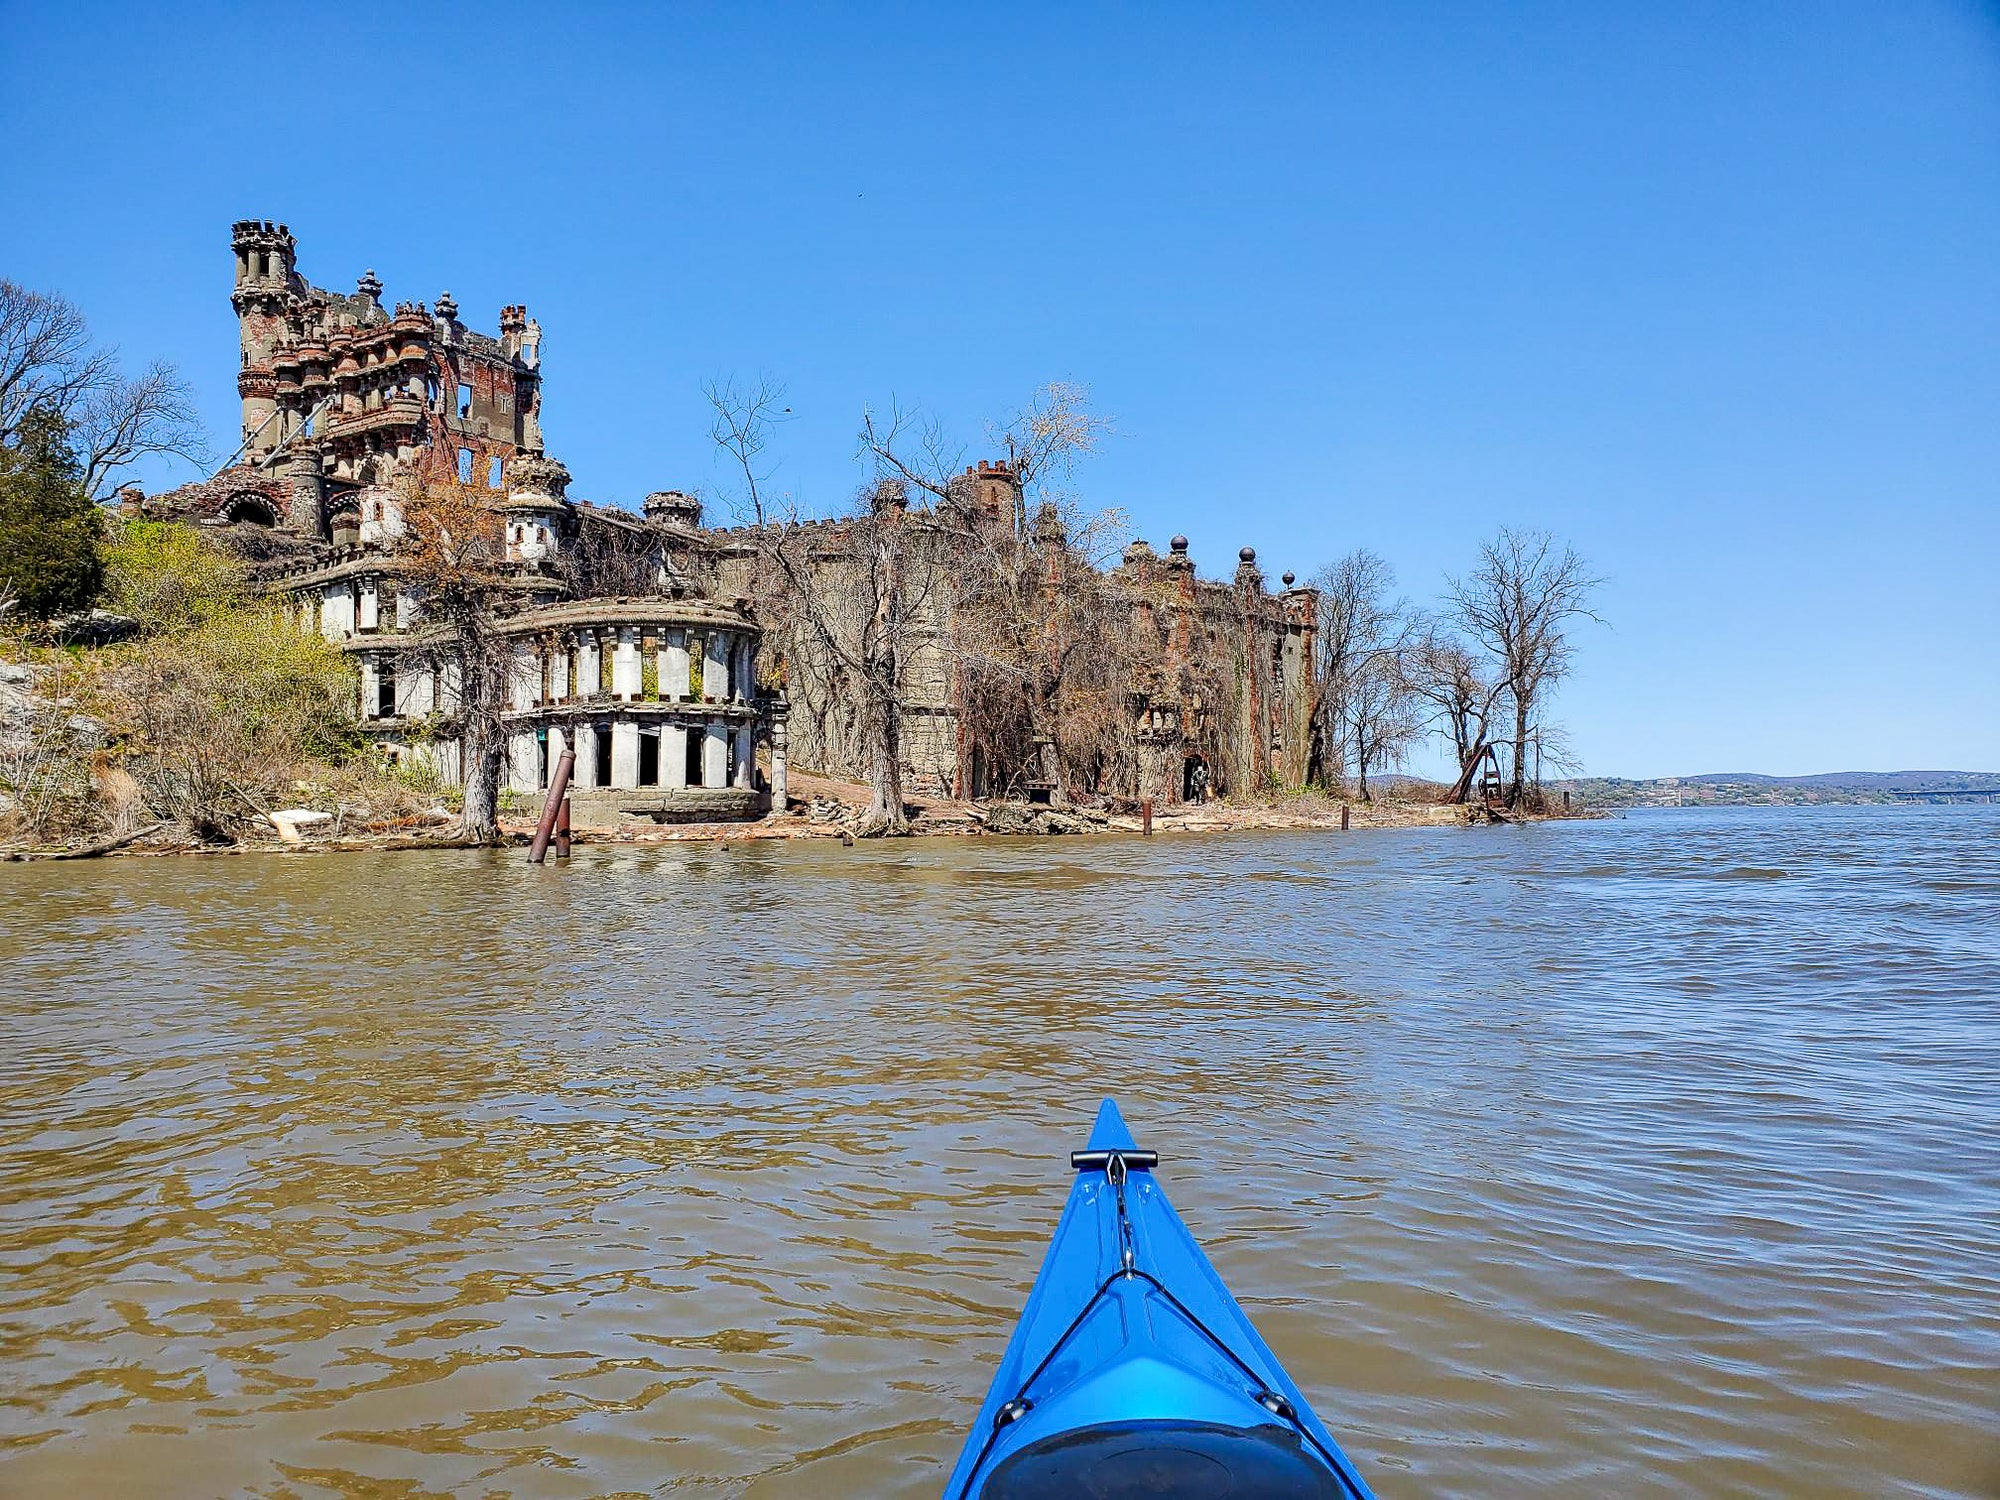 Trip Report: Exploring the Hudson River and Bannerman Castle with the Jersey Shore Sea Kayak Association